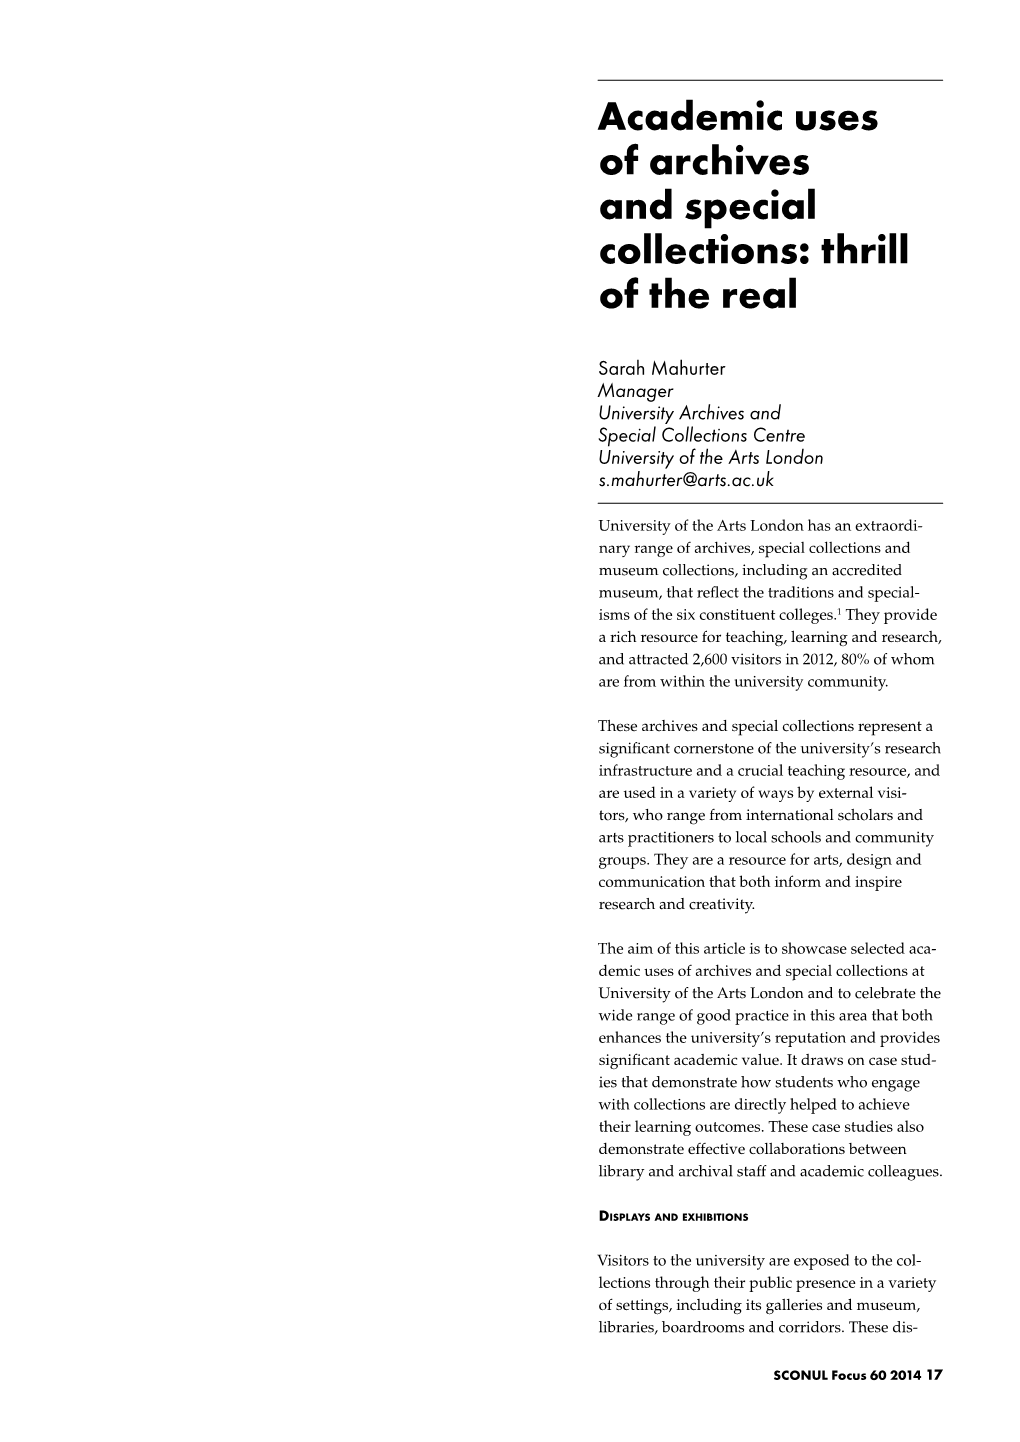 Academic Uses of Archives and Special Collections: Thrill of the Real